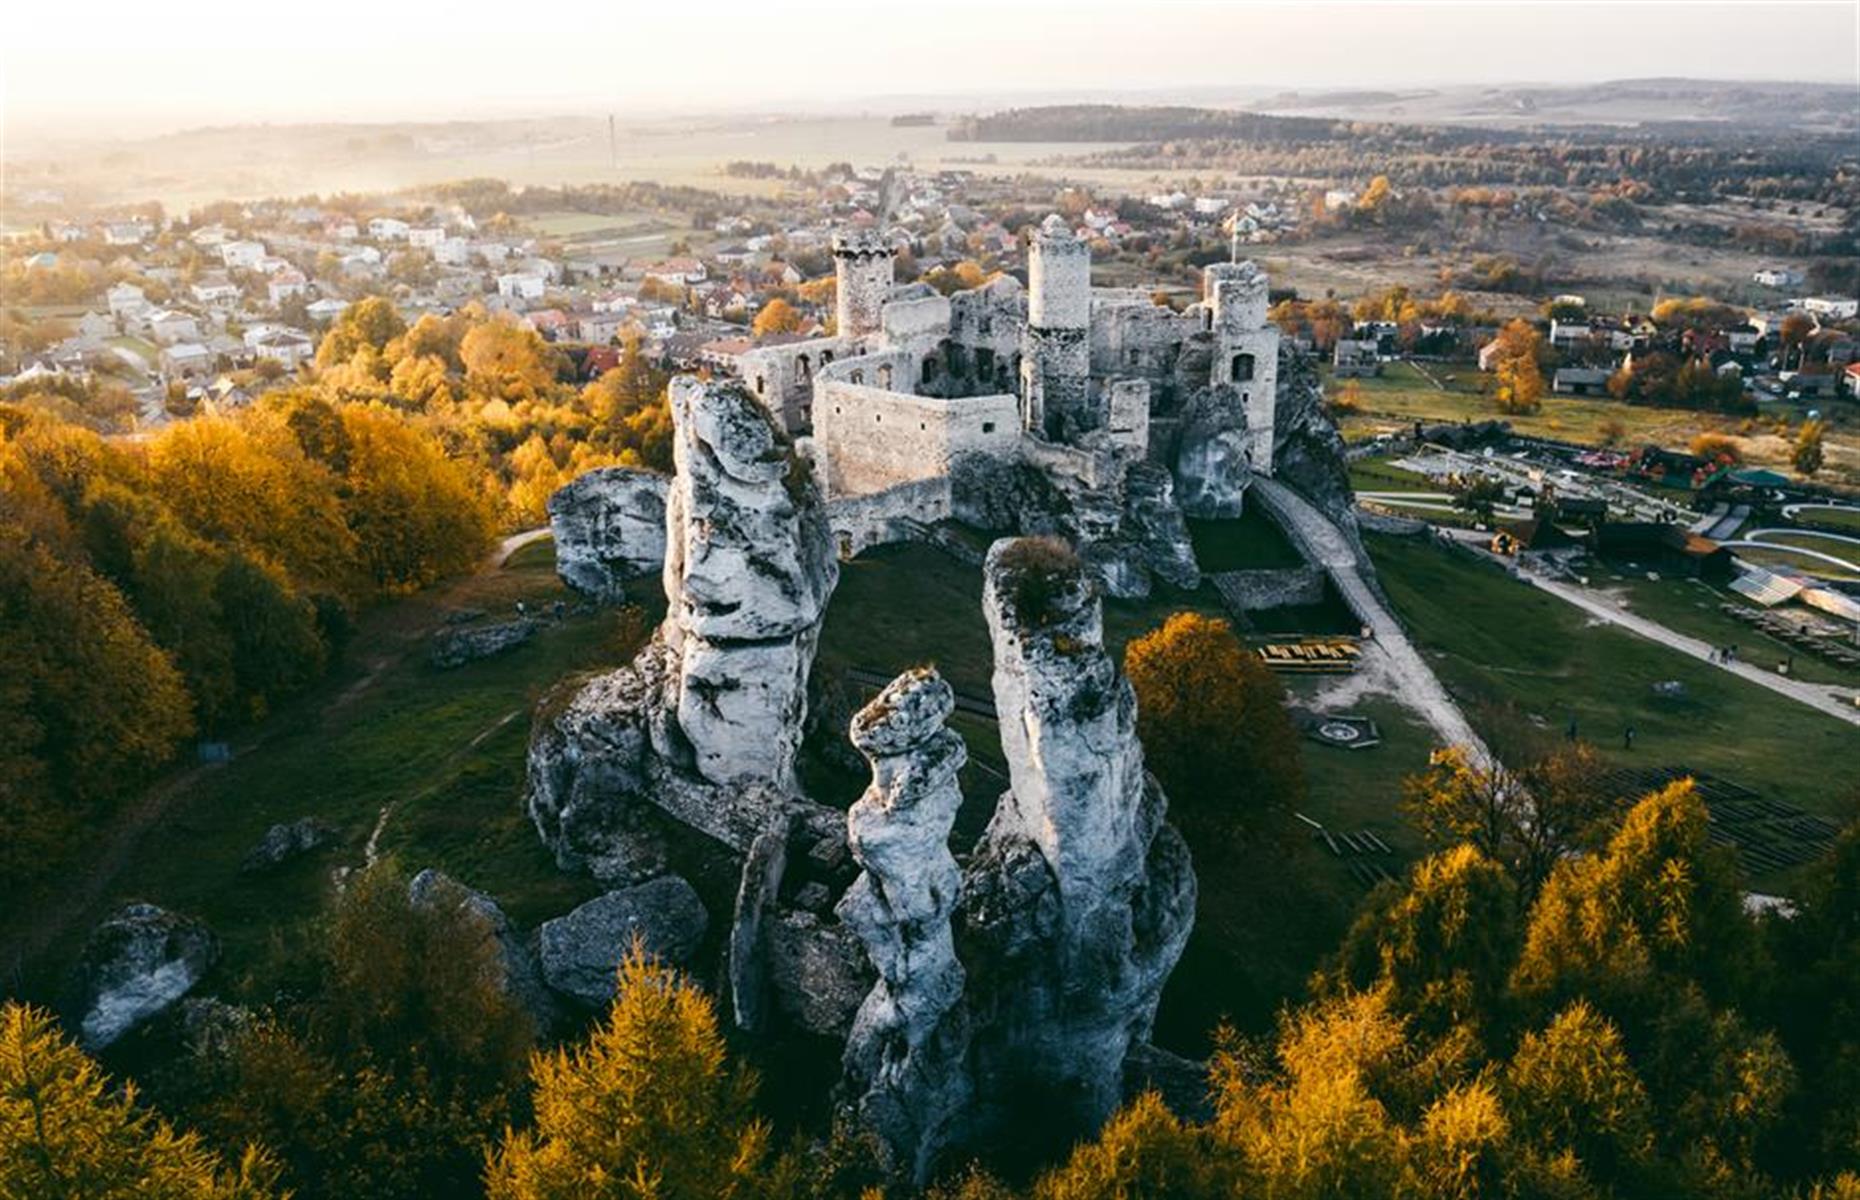 <p><a href="https://www.zamek-ogrodzieniec.pl/">This dramatic ruined hilltop castle</a> – which has its roots back in the 14th century and was swallowed by fire in the 18th century – has become a magnet for filmmakers and TV crews. Most recently, it served as a backdrop in Netflix fantasy series <em>The Witcher</em>. Apparently, it's also a magnet for the undead: the hulking figure of a spectral black dog has been sighted roaming the grounds, while there have been reports of a creepy headless horseman too.</p>